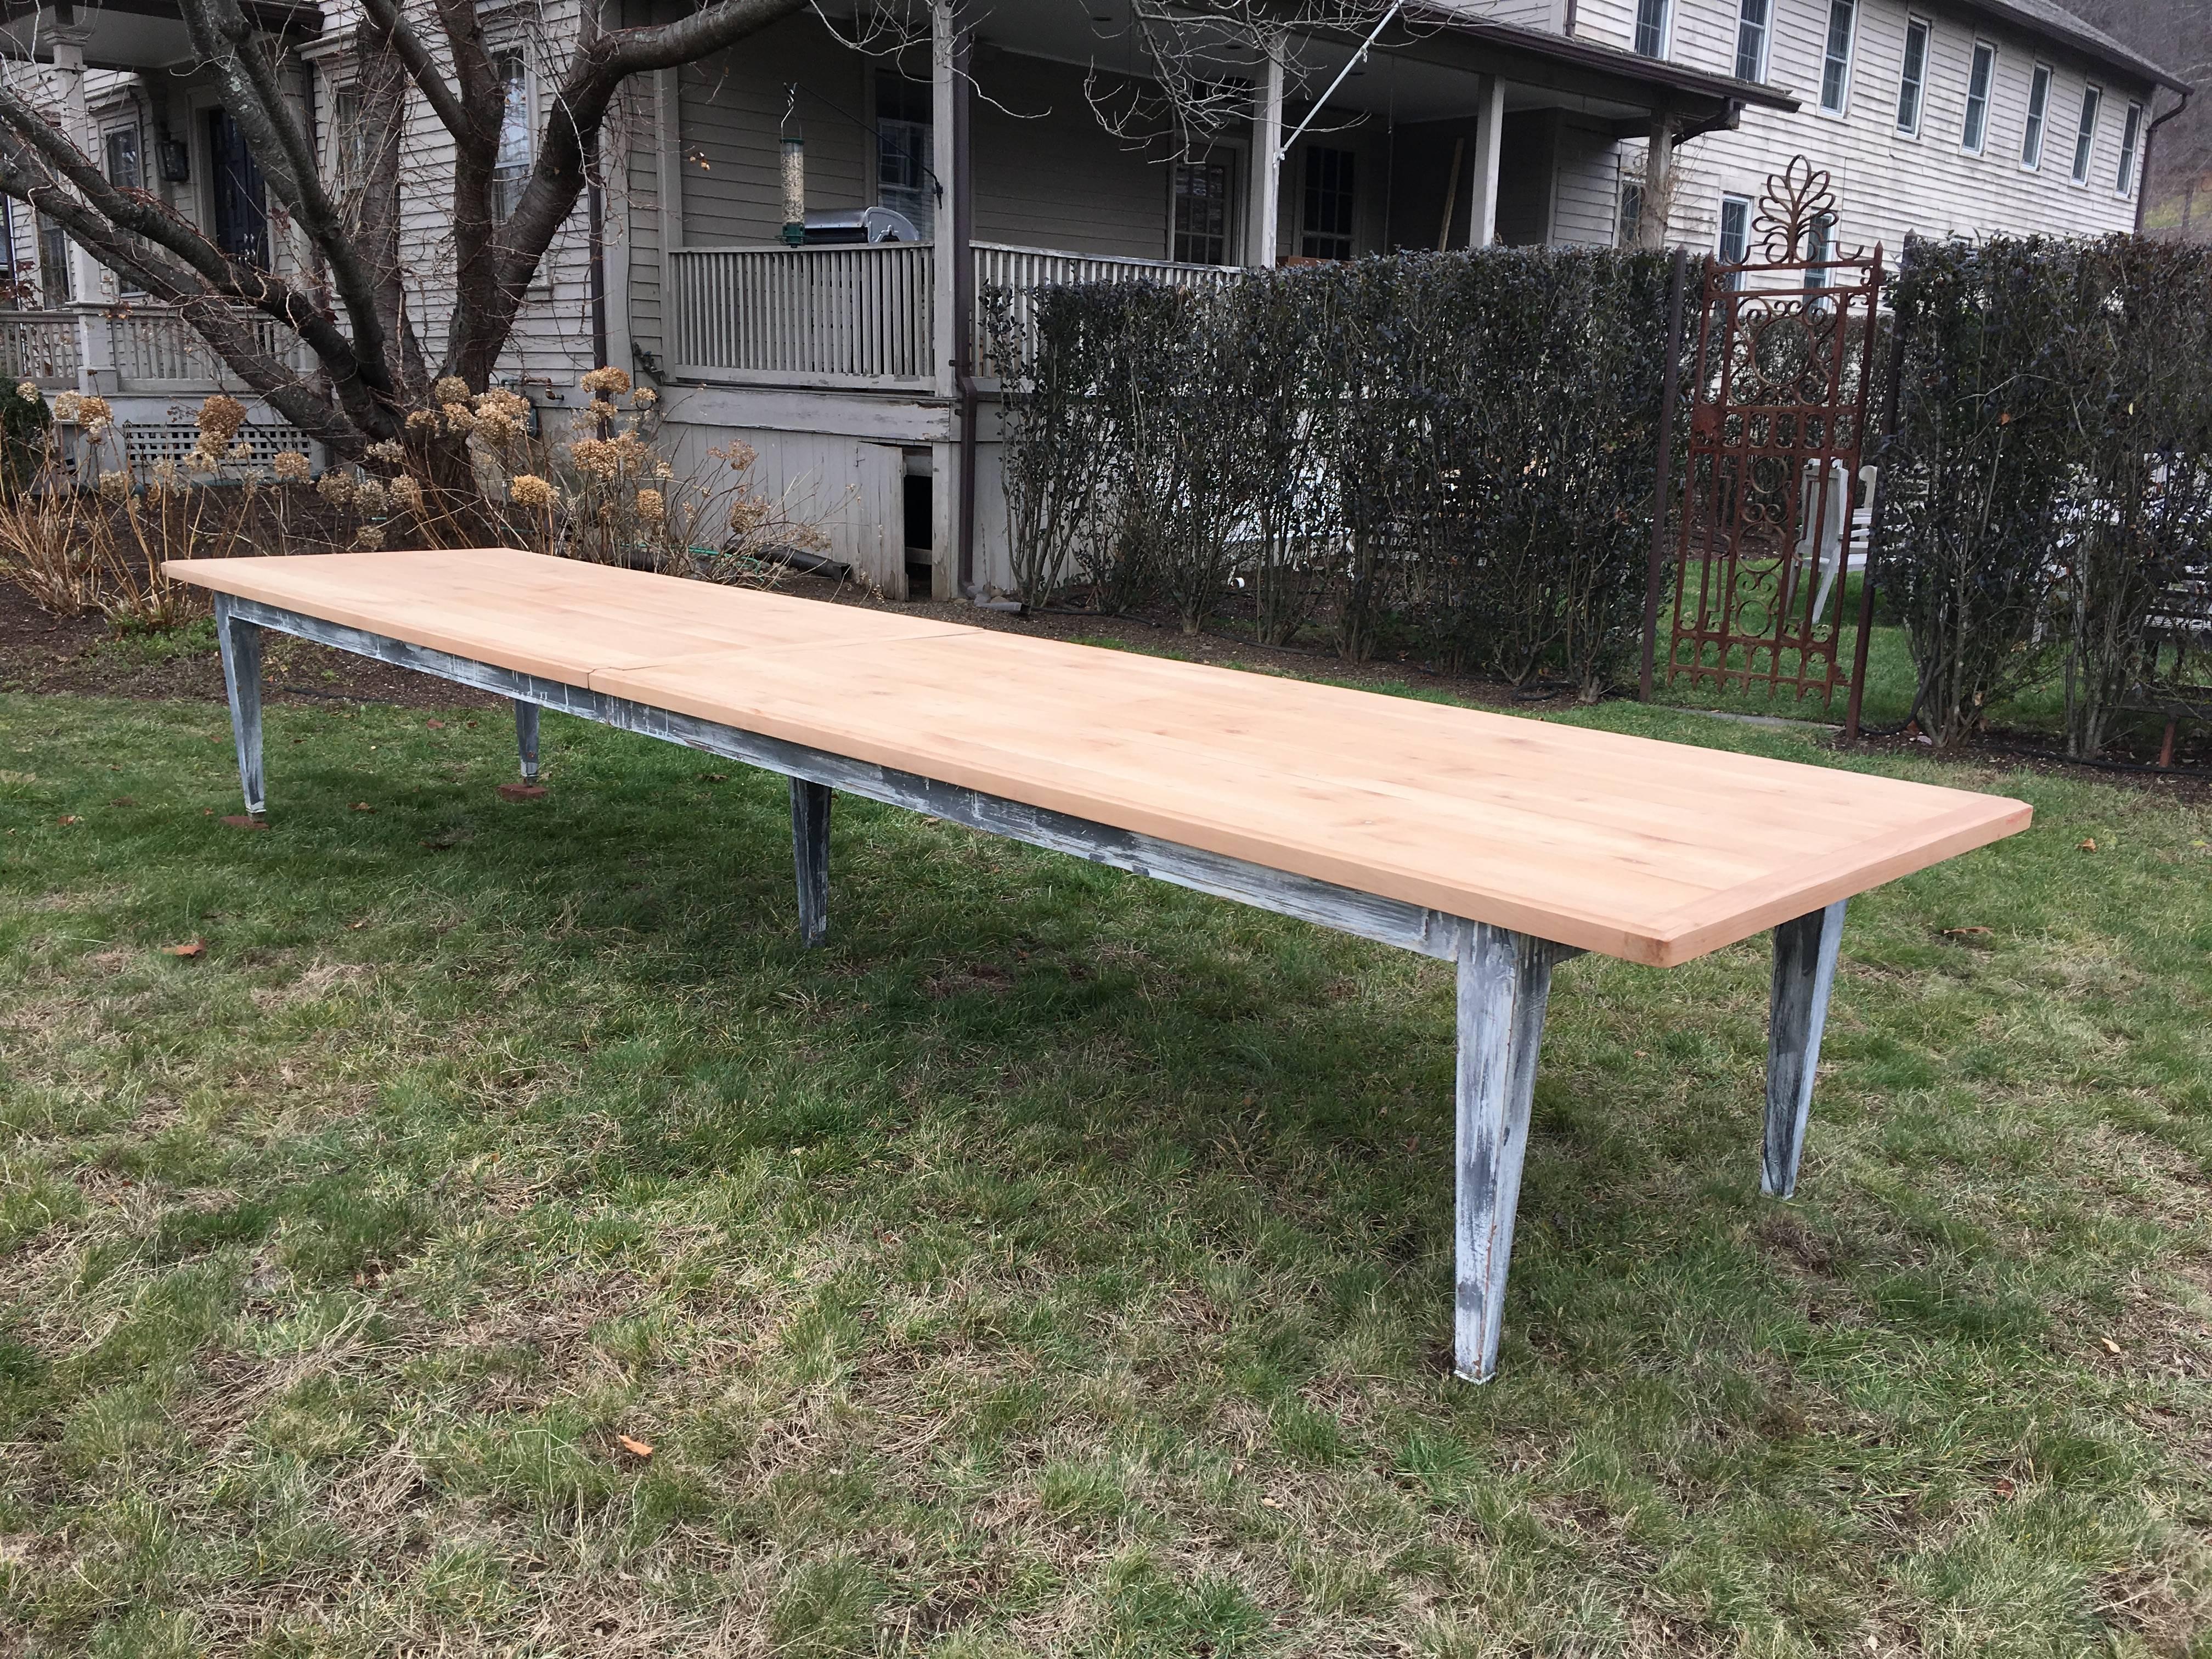 Now here's 16+ foot log table that will do any large dining room proud! Made of red oak with decorative brass banding on the bottom of the legs, it has an ingenious sliding mechanism that allows it to be dissembled into two parts for shipping. When